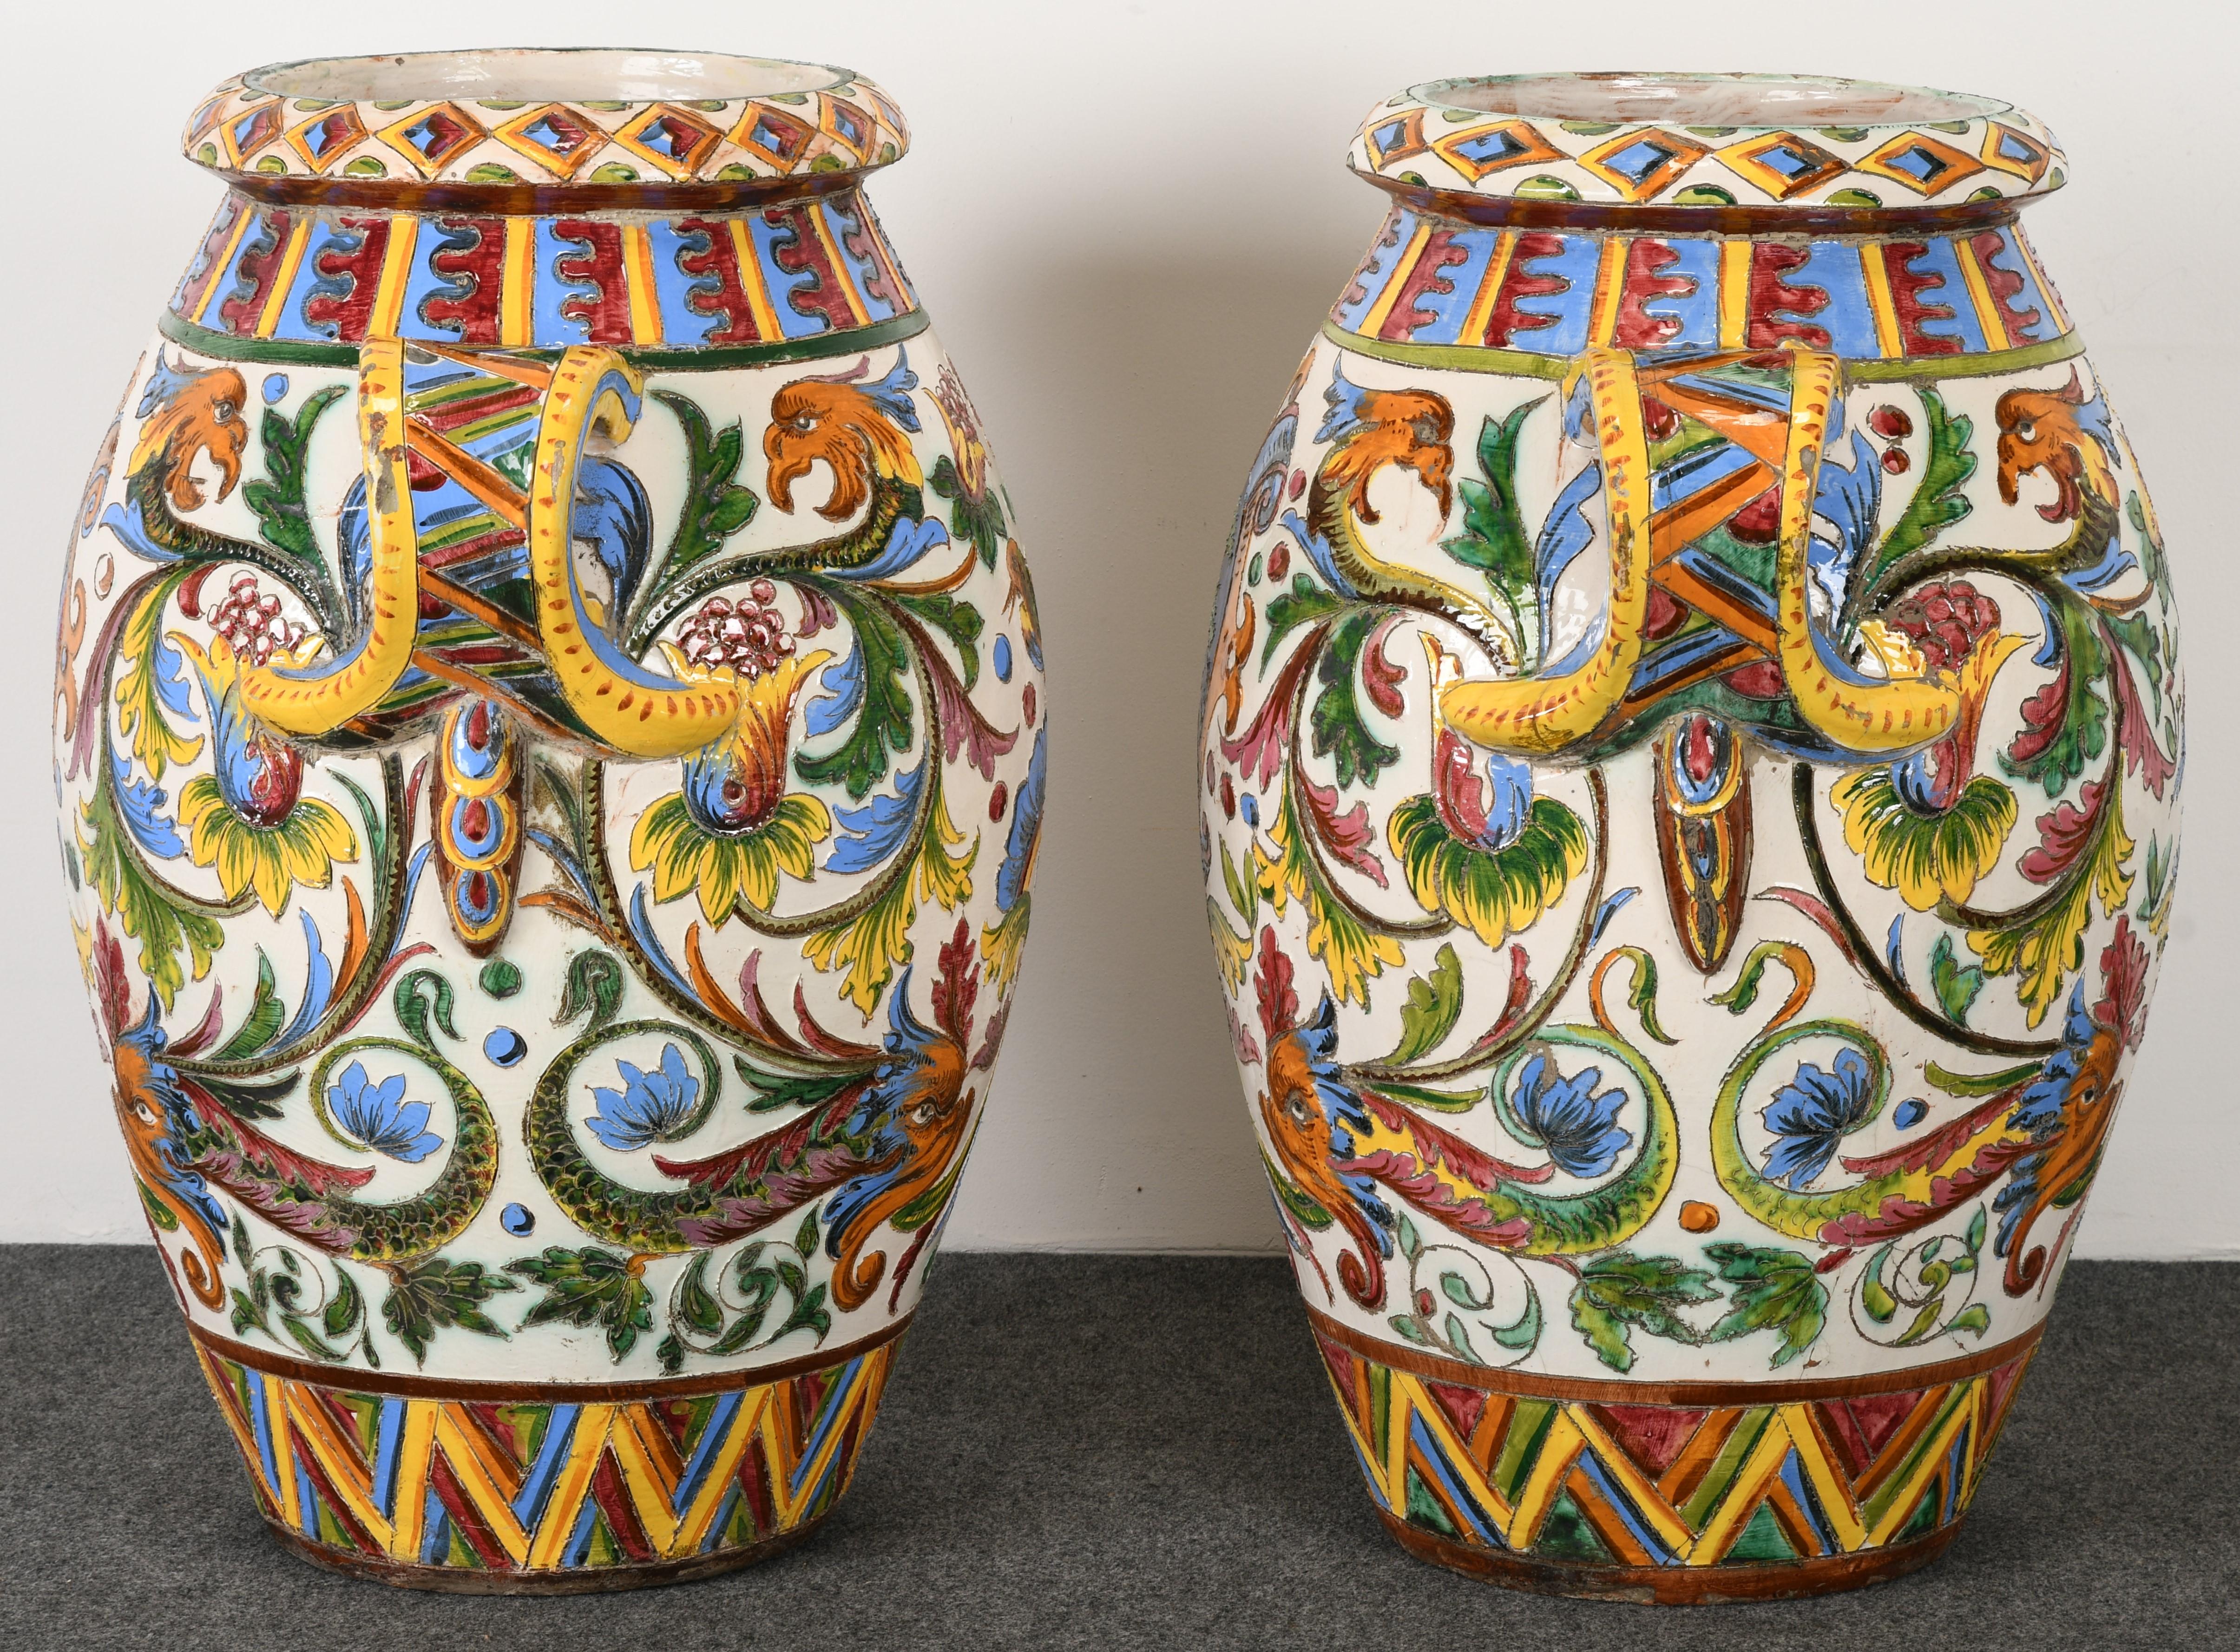 Spanish Colonial Pair of Large-Scale Italian Majolica Terracotta Urns, 20th Century